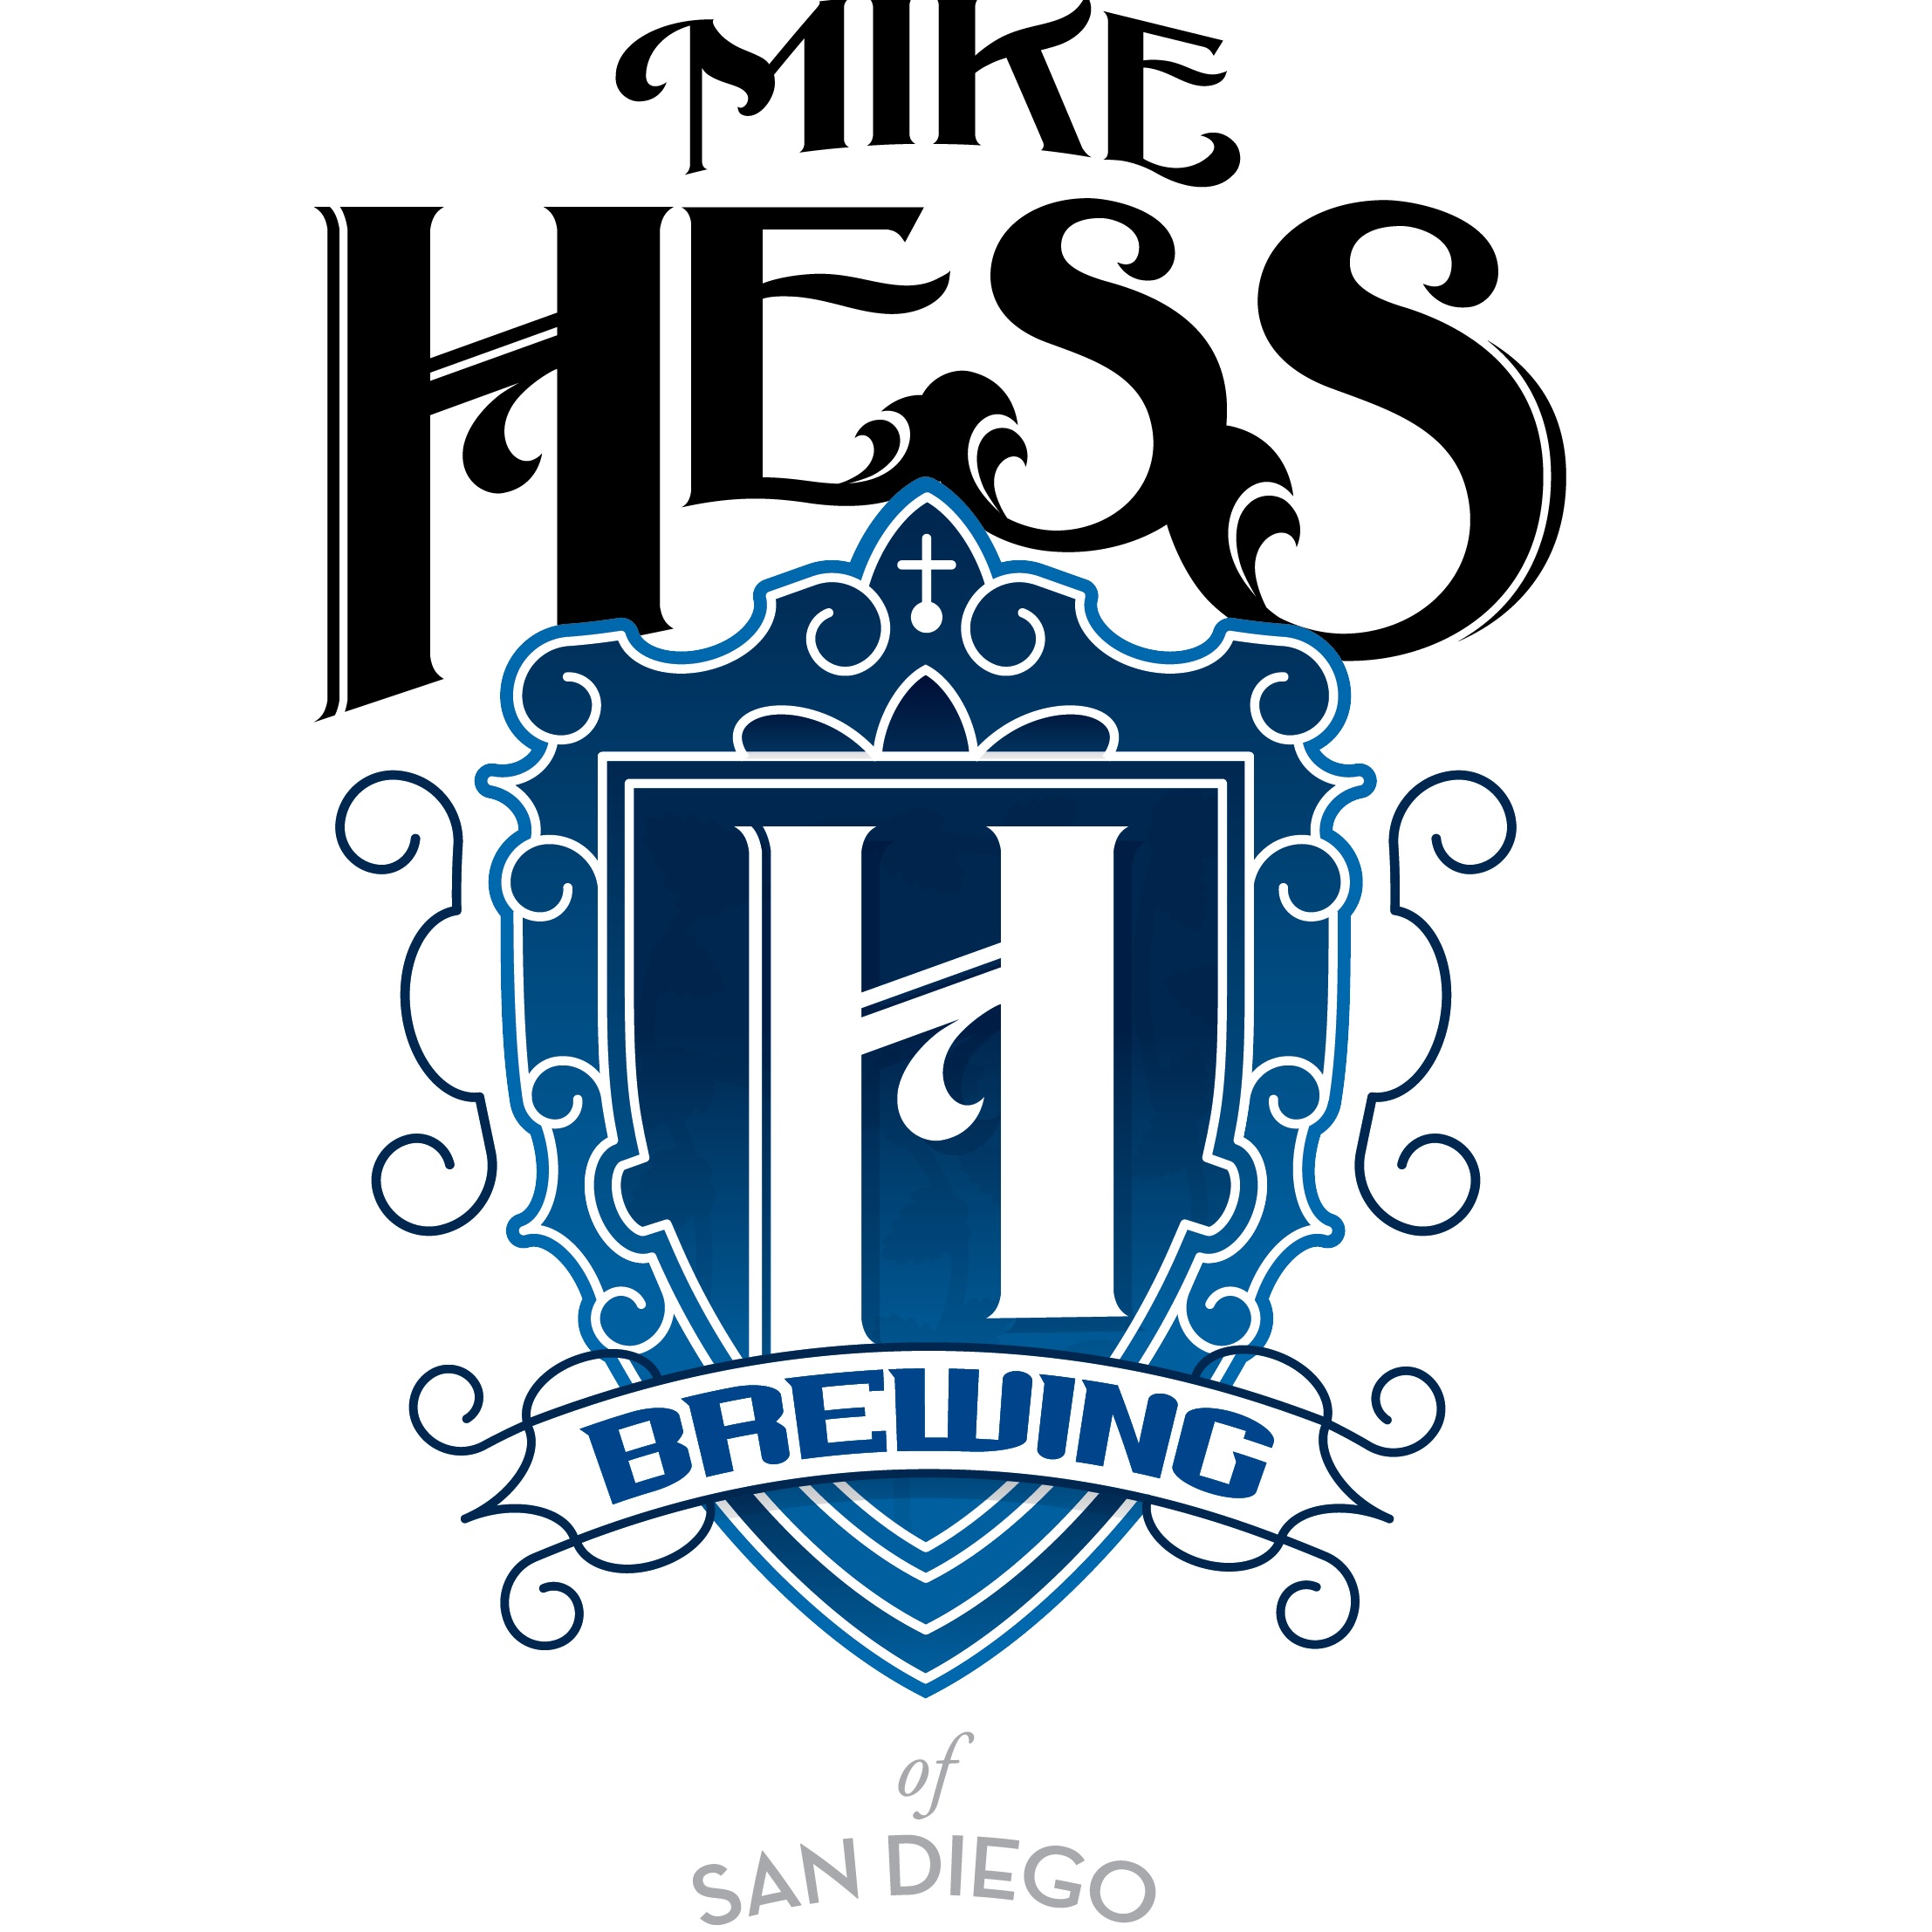 Mike hess brewing